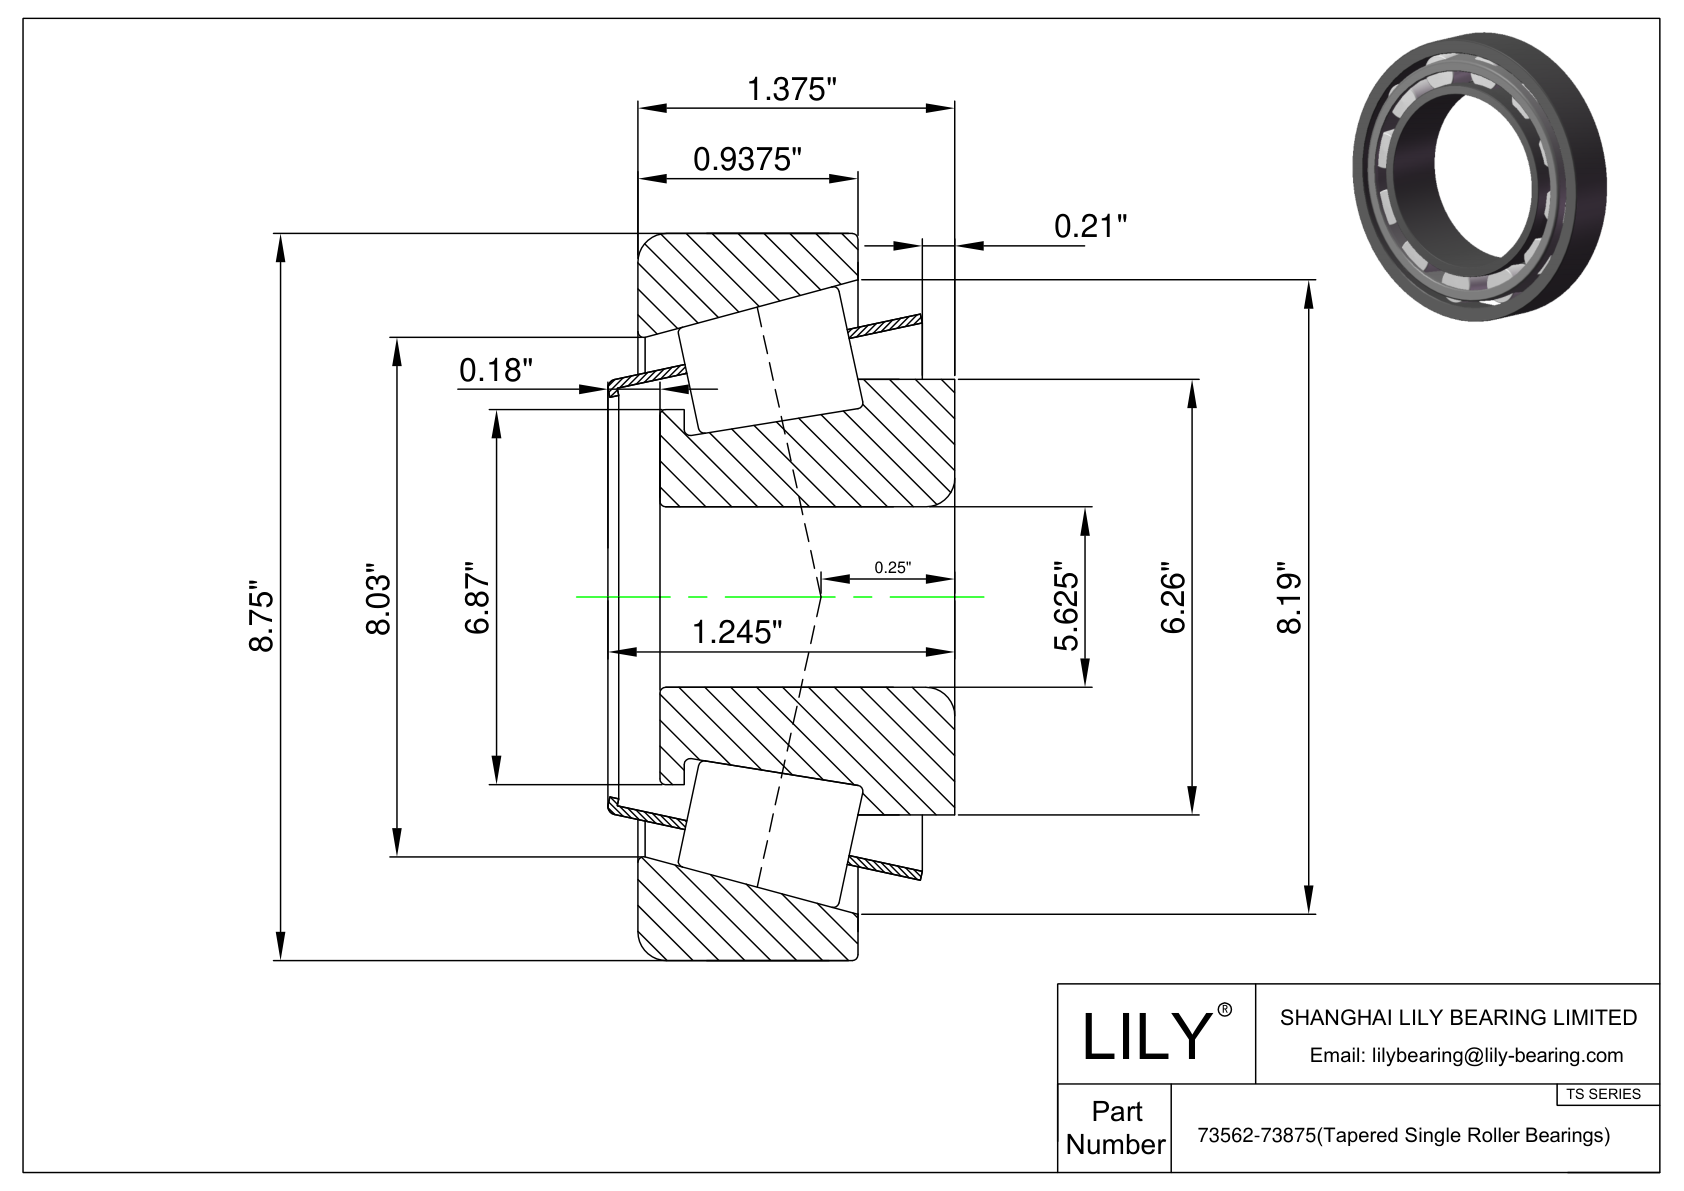 73562-73875 TS (Tapered Single Roller Bearings) (Imperial) cad drawing